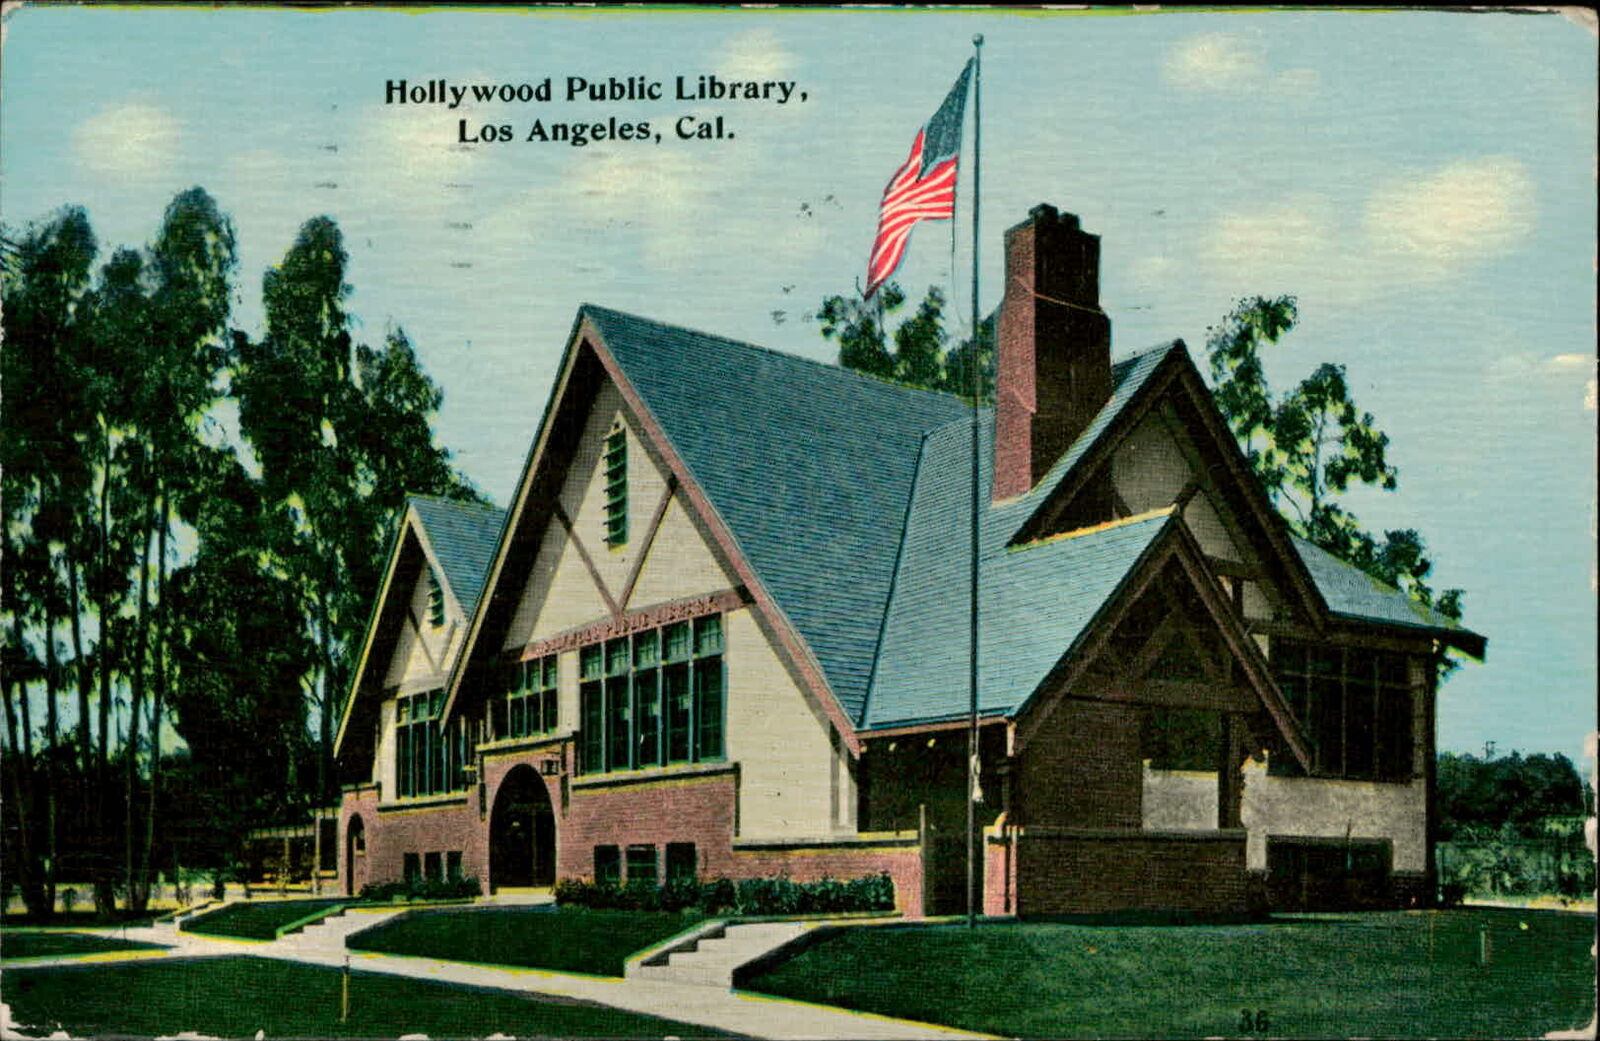 Postcard: Hollywood Public Library, Los Angeles, Cal.